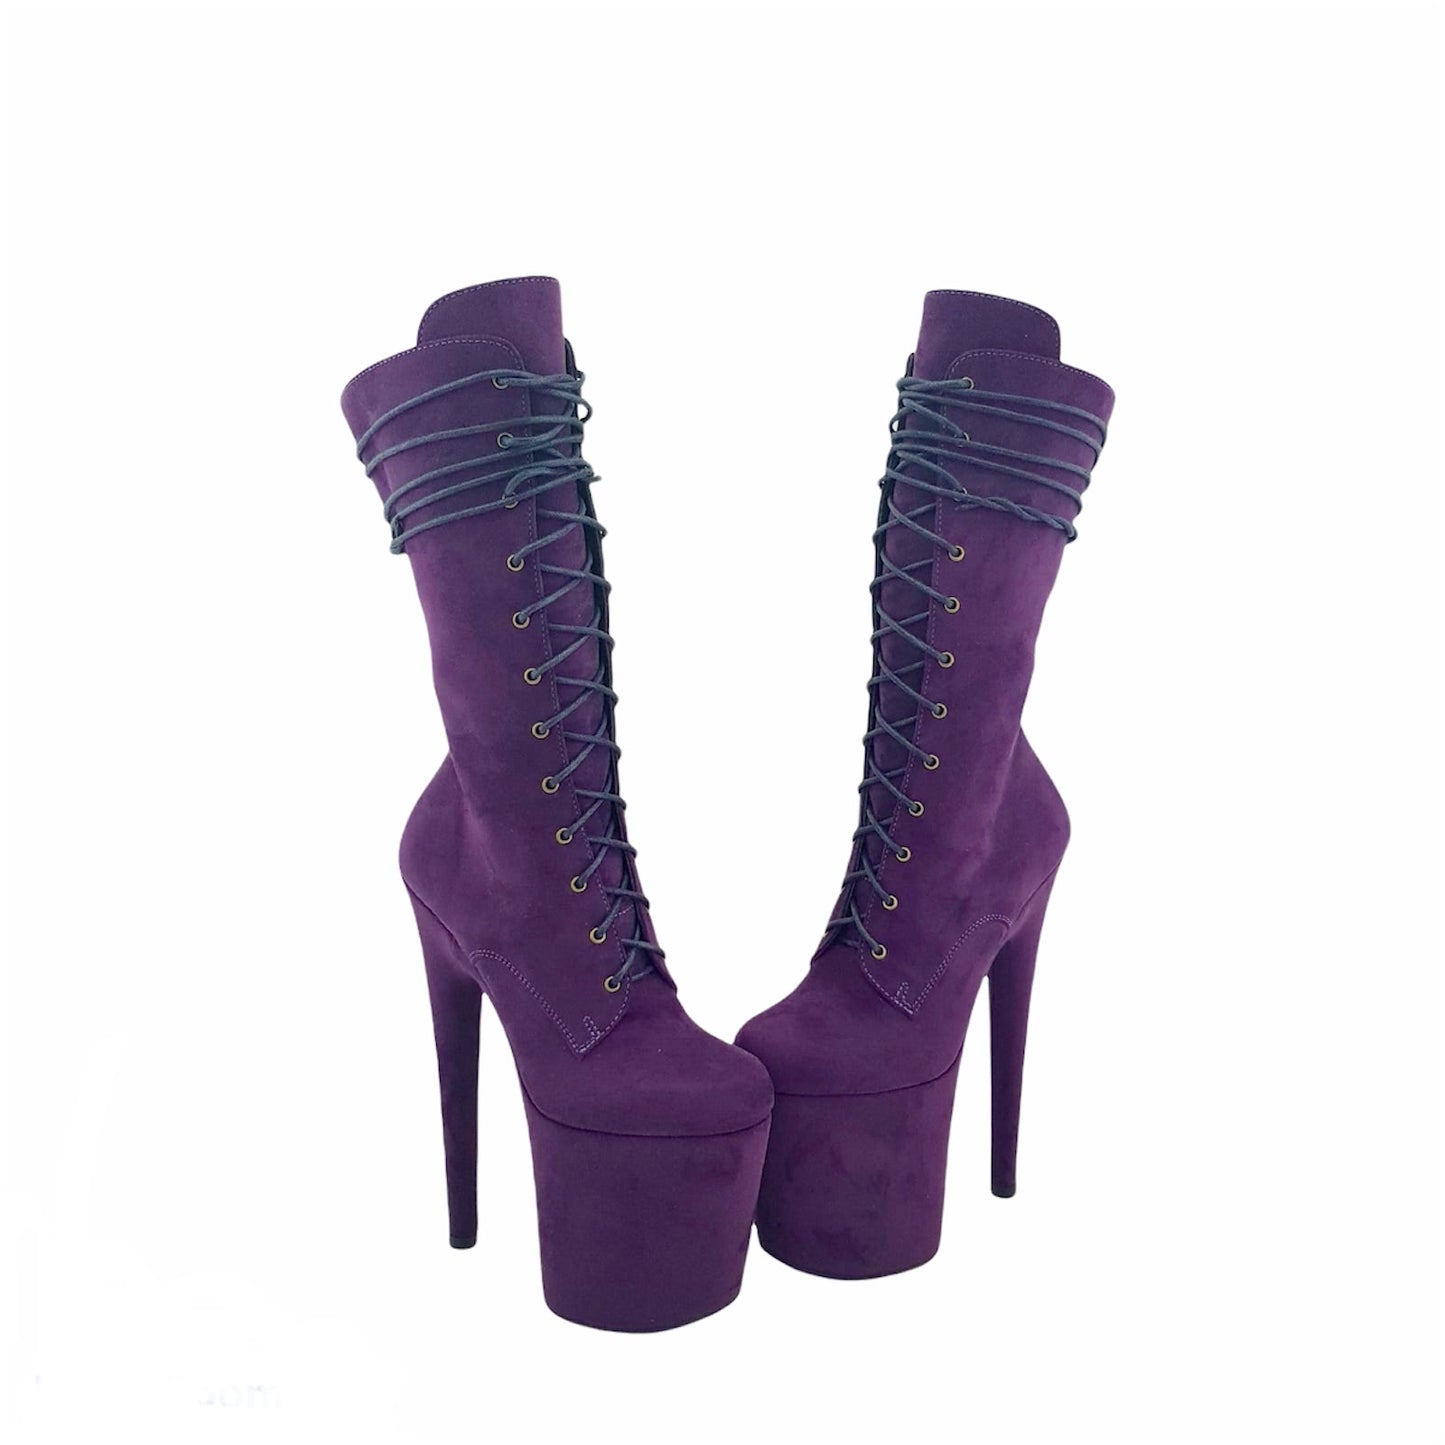 Purple vegan suede ankle - mid calf boots(more colors are available)